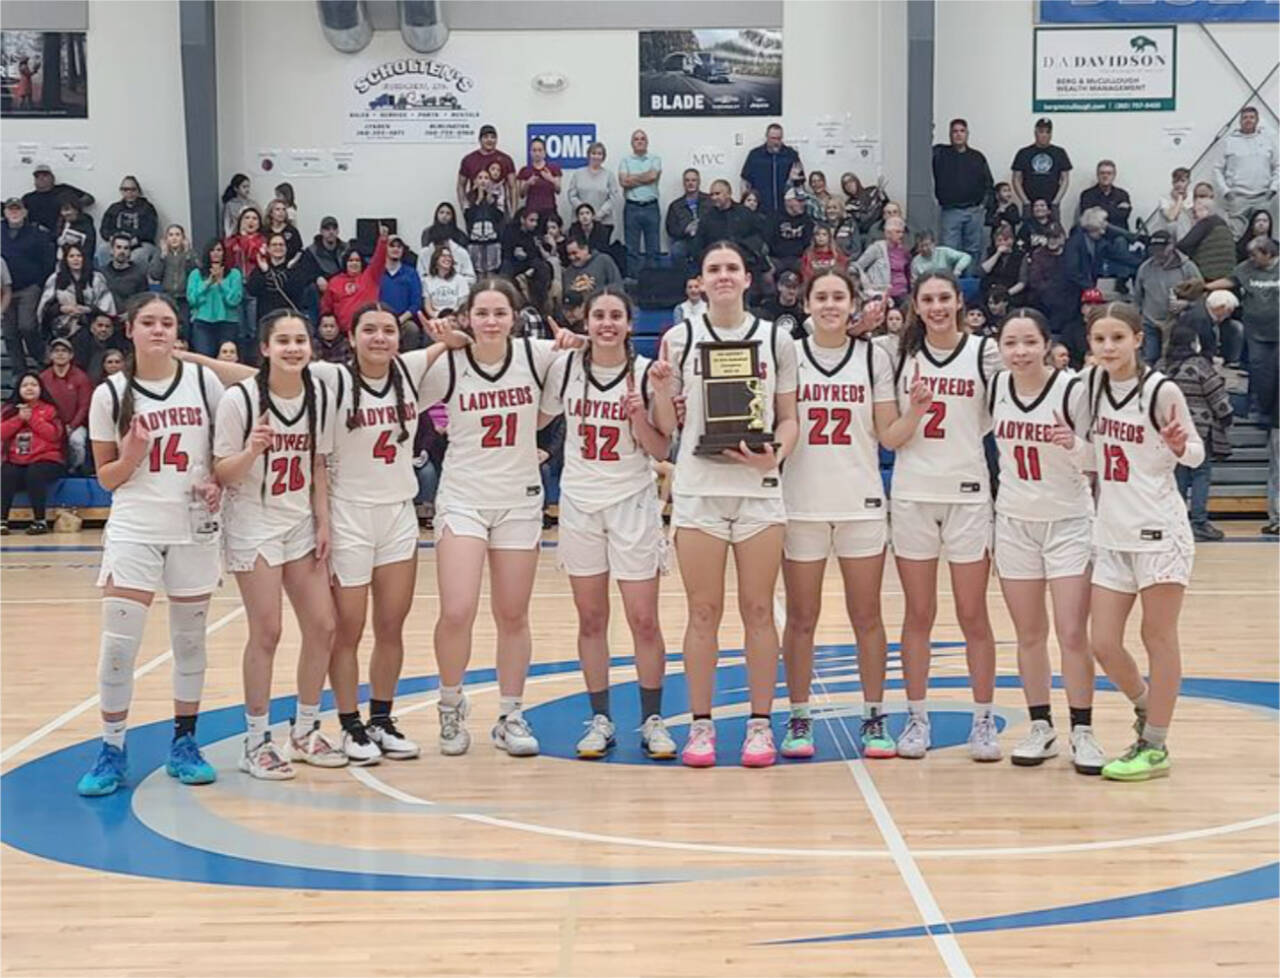 The defending state champion Neah Bay girls basketball team celebrates its tridistrict championship Saturday in Mount Vernon. (Courtesy photo)